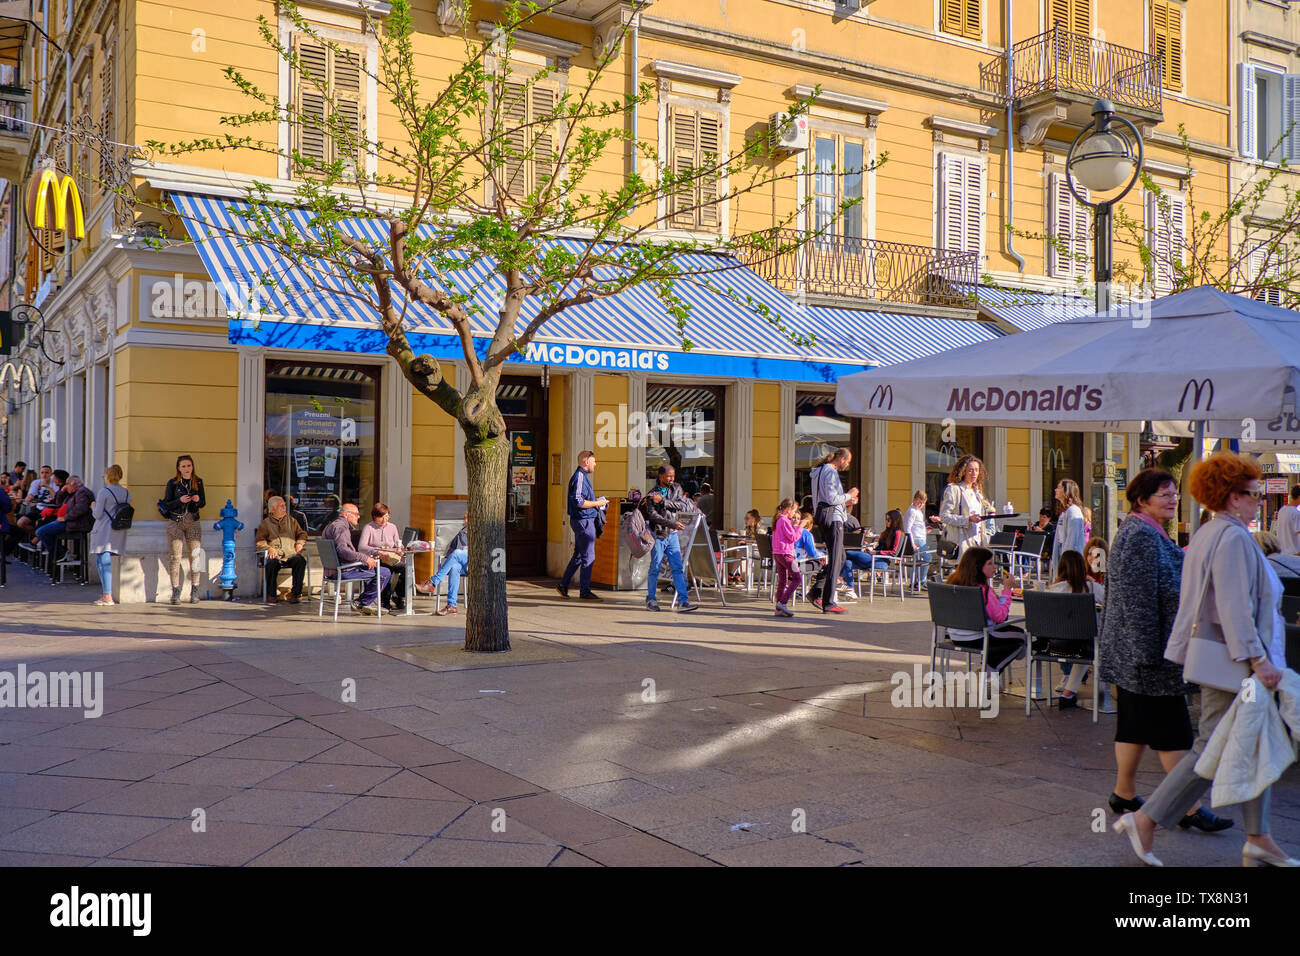 April 19, 2019 : People sitting and enjoying meals purchased at McDonald's restaurant in the city centre square Stock Photo